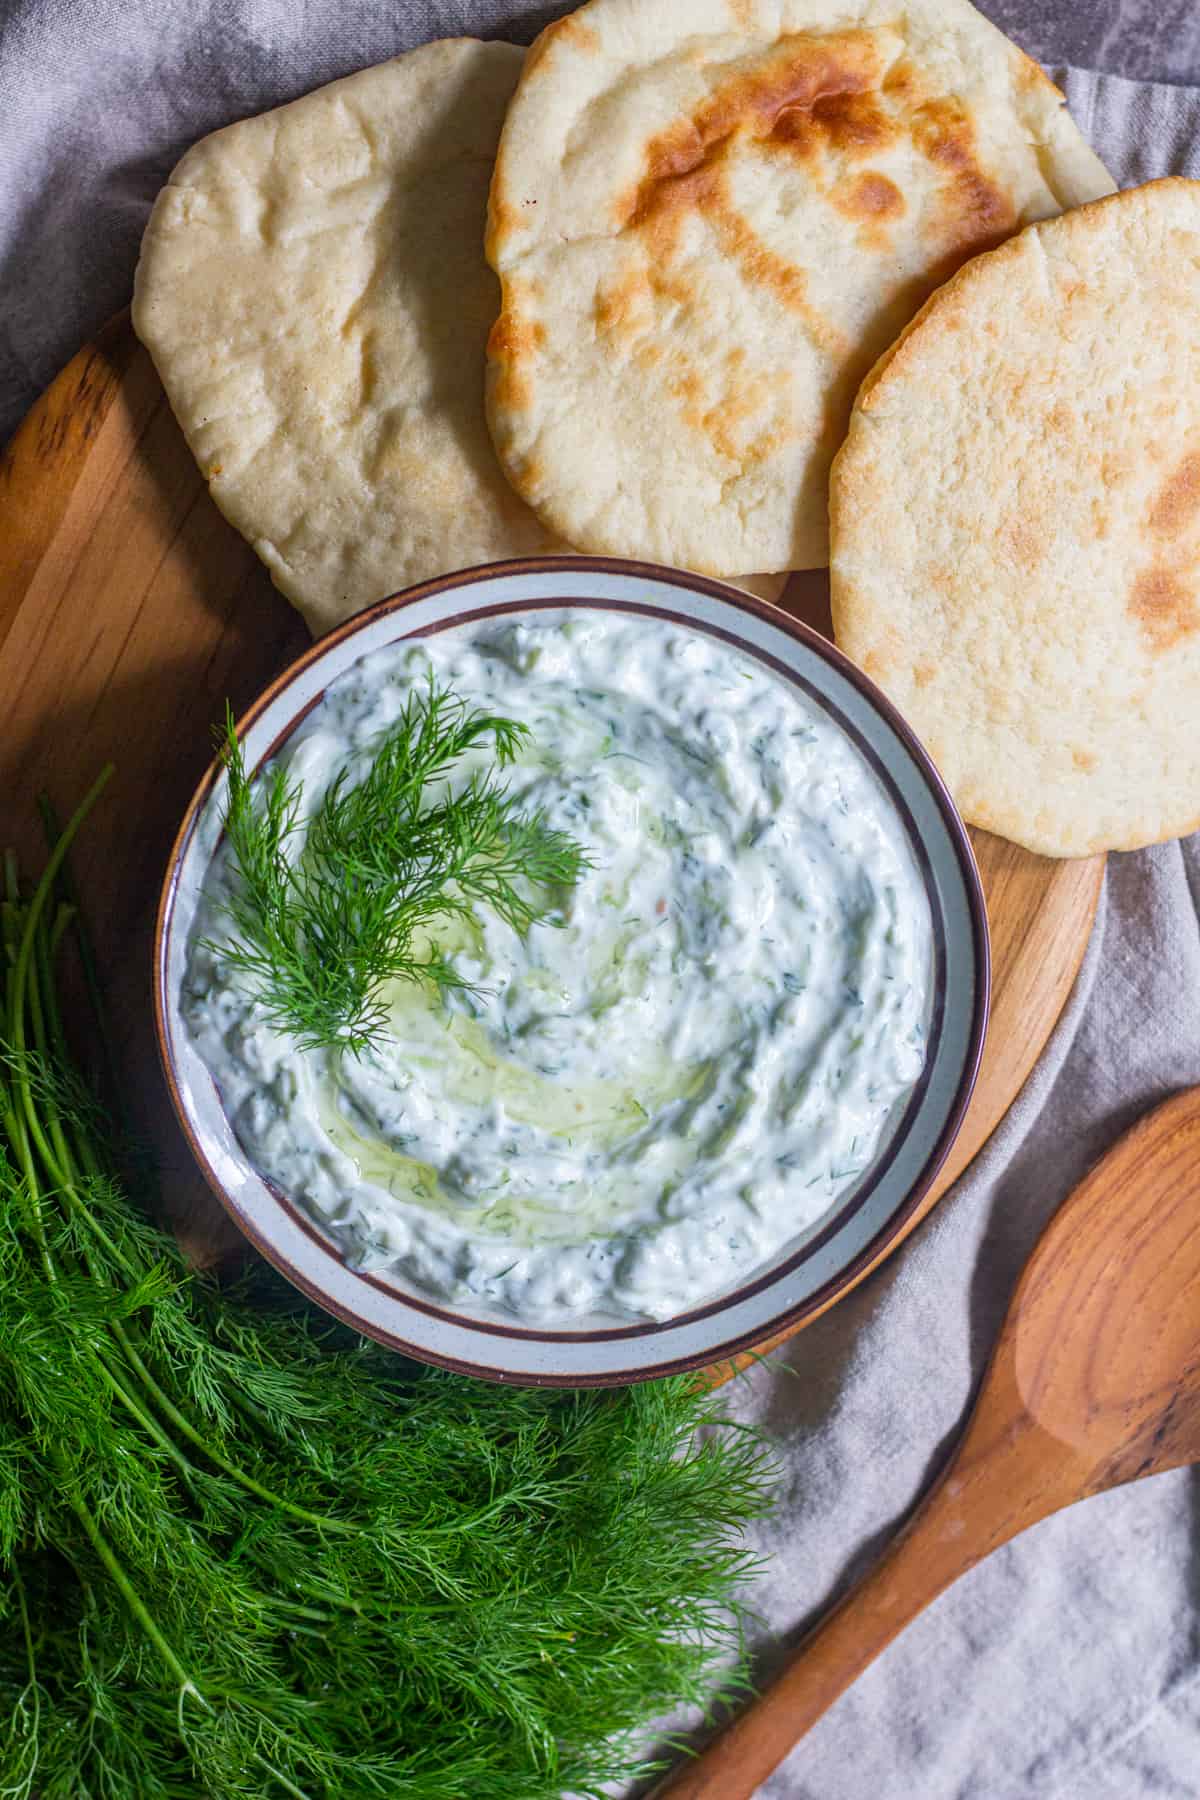 Homemade tzatziki sauce is perfect with some fresh pita bread as an appetizer. 